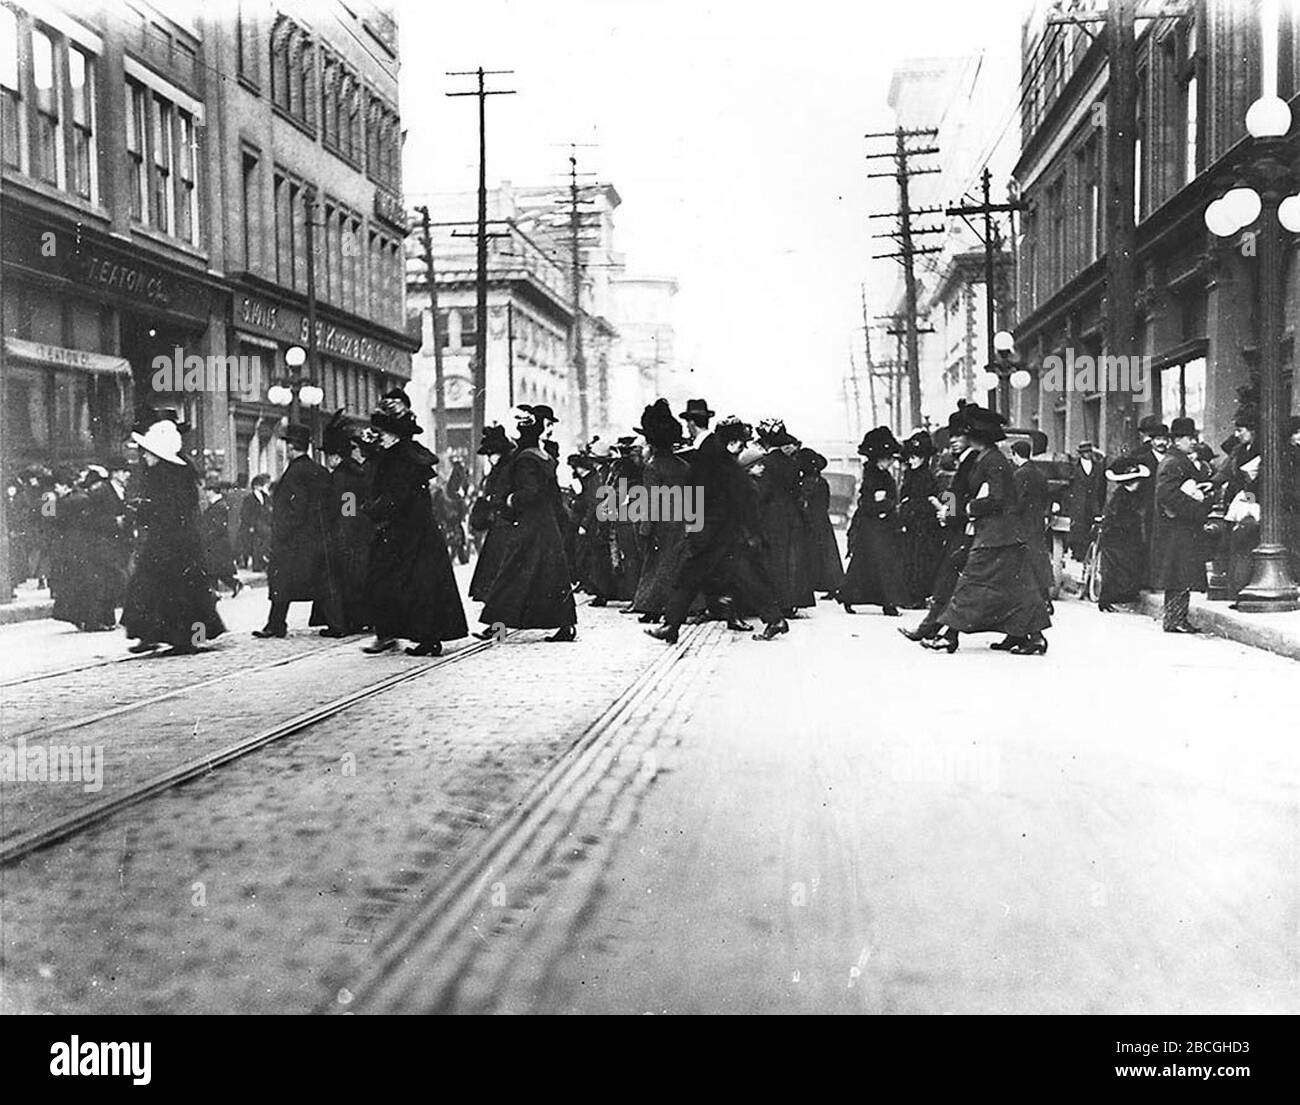 Queen Street West, looking east towards Yonge Street. Shoppers cross  between the Simpsons (right) and Eaton's (left) department stores on  opposite sides of the street. (Toronto, Canada); 1910; This image is  available